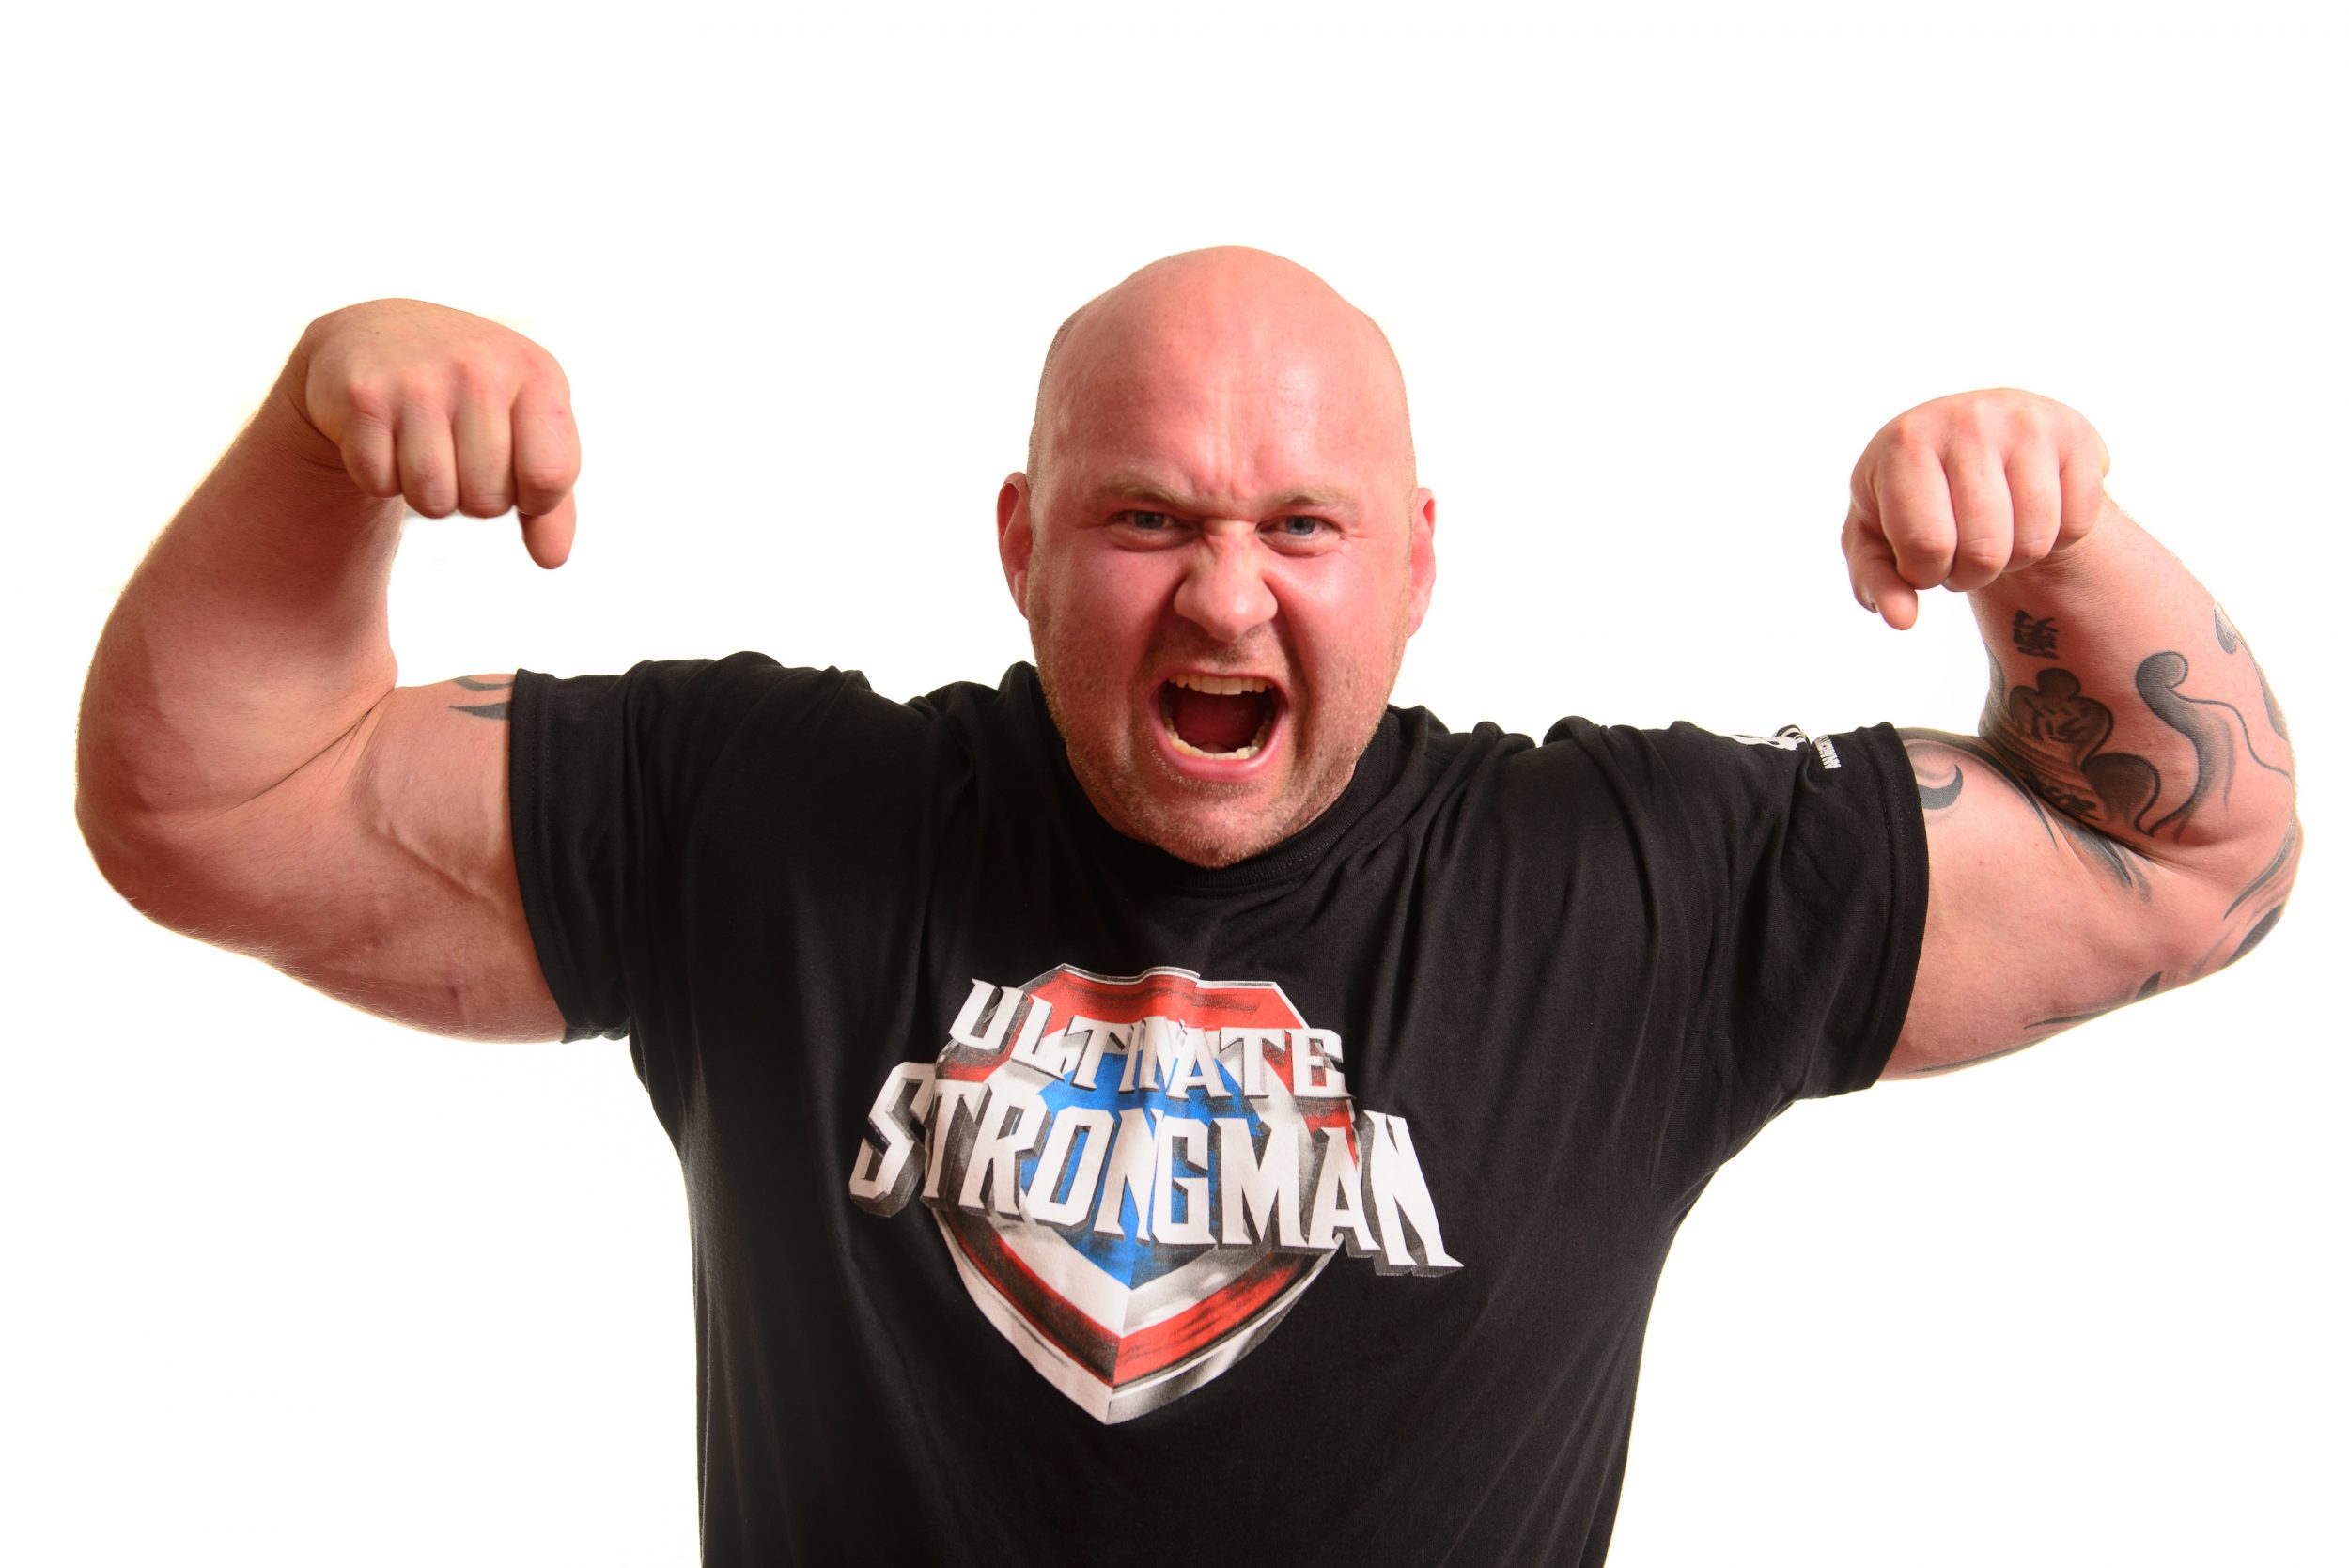 Ultimate Strongman » UK’s Strongest Man coming to Channel 5 this November!